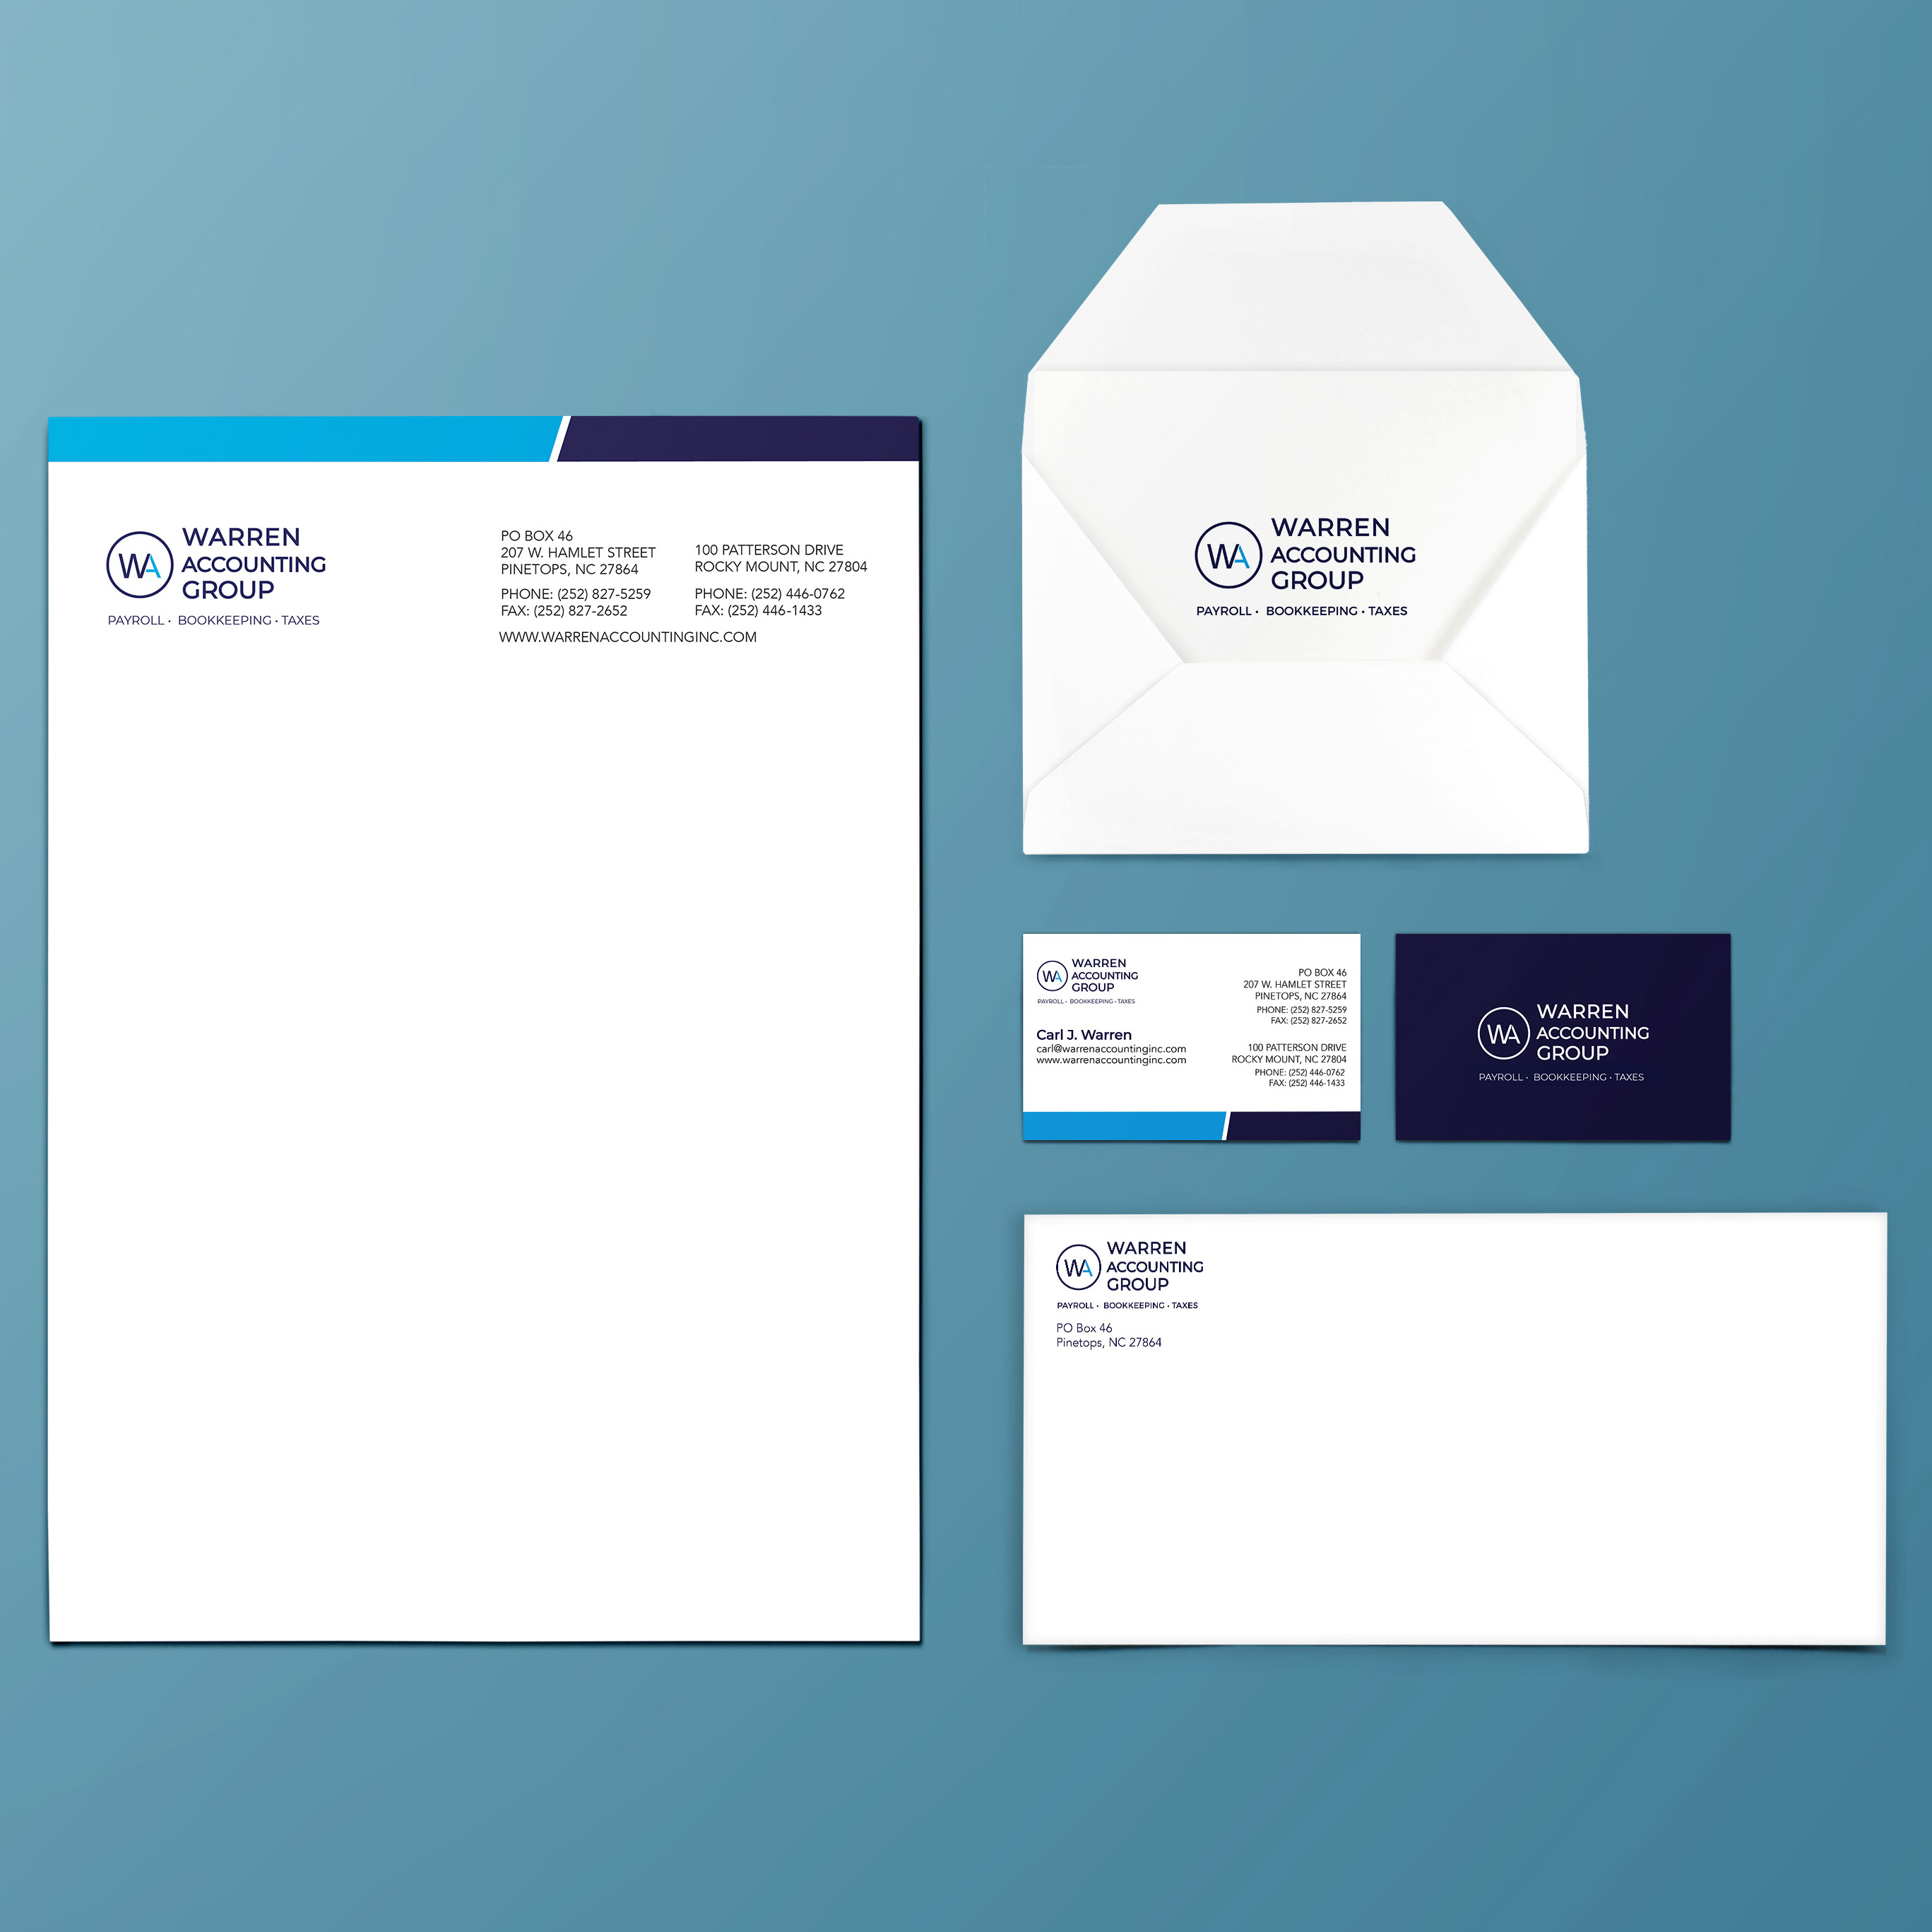 Warren Accounting Group Stationary set